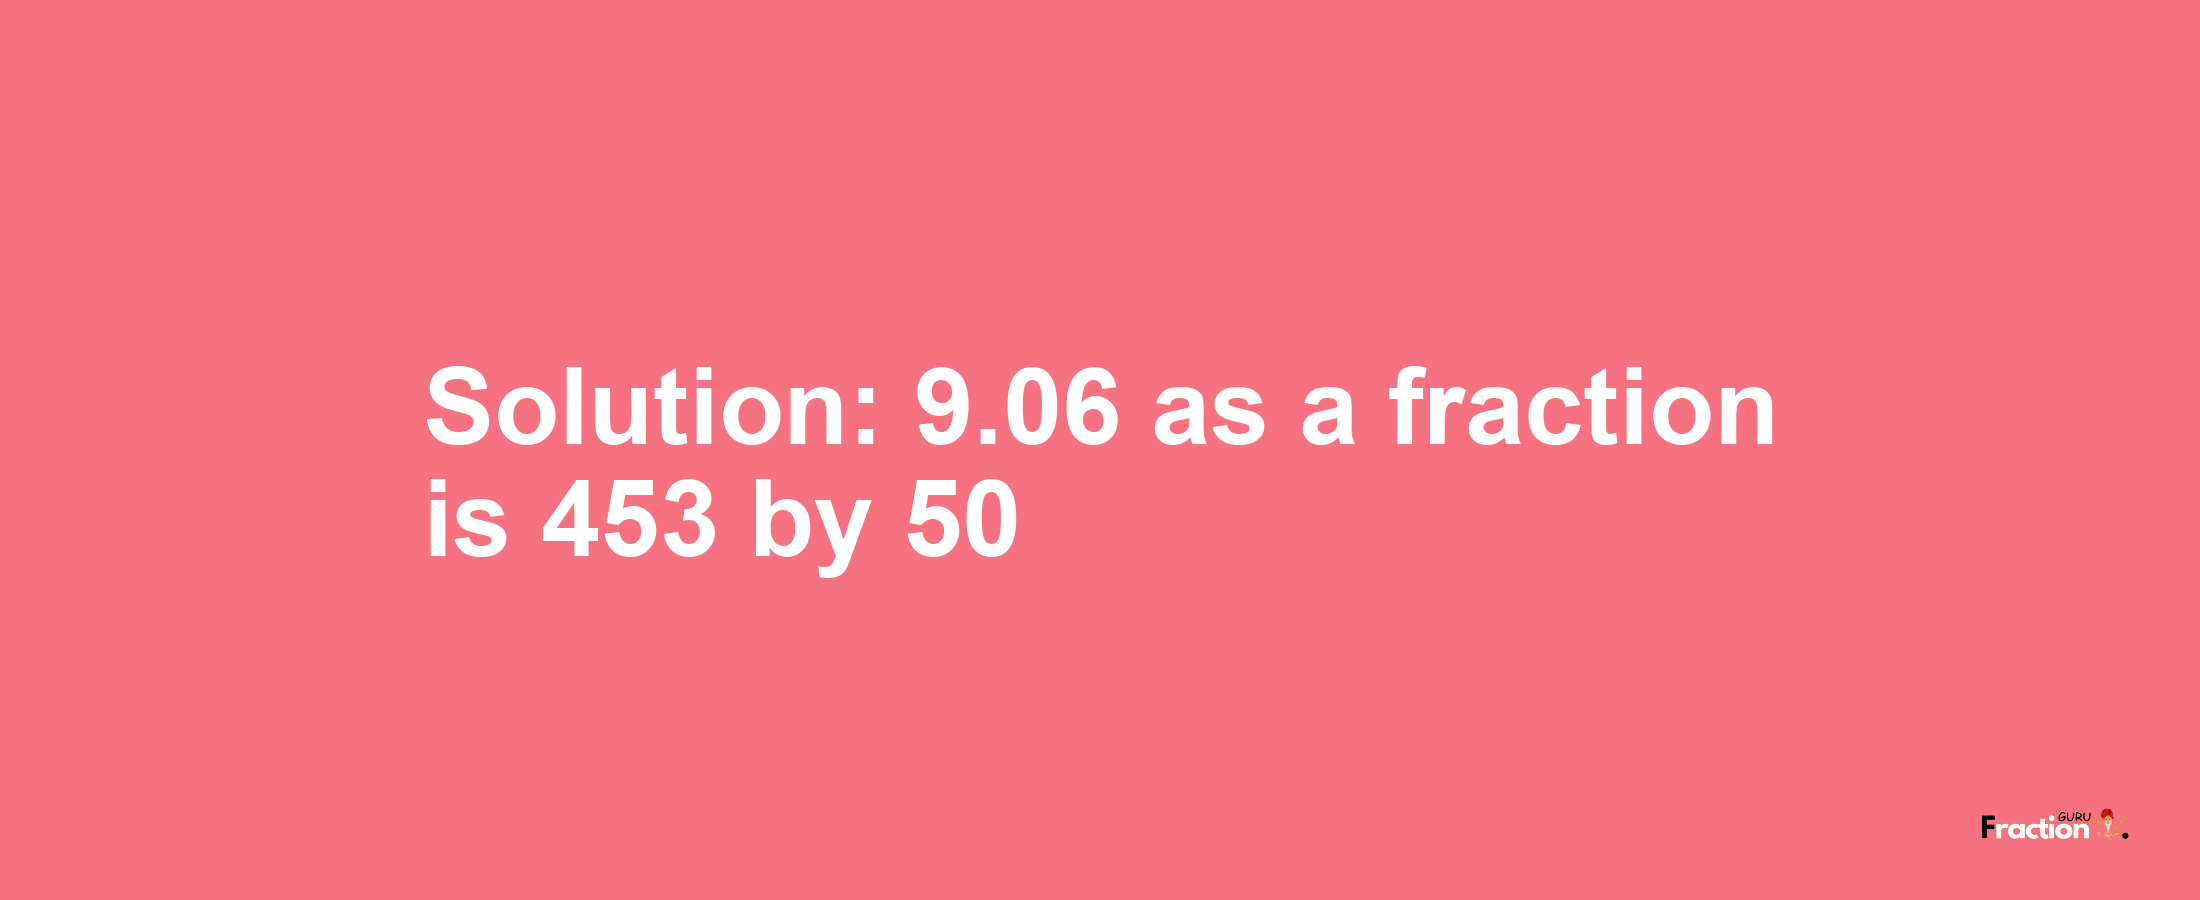 Solution:9.06 as a fraction is 453/50